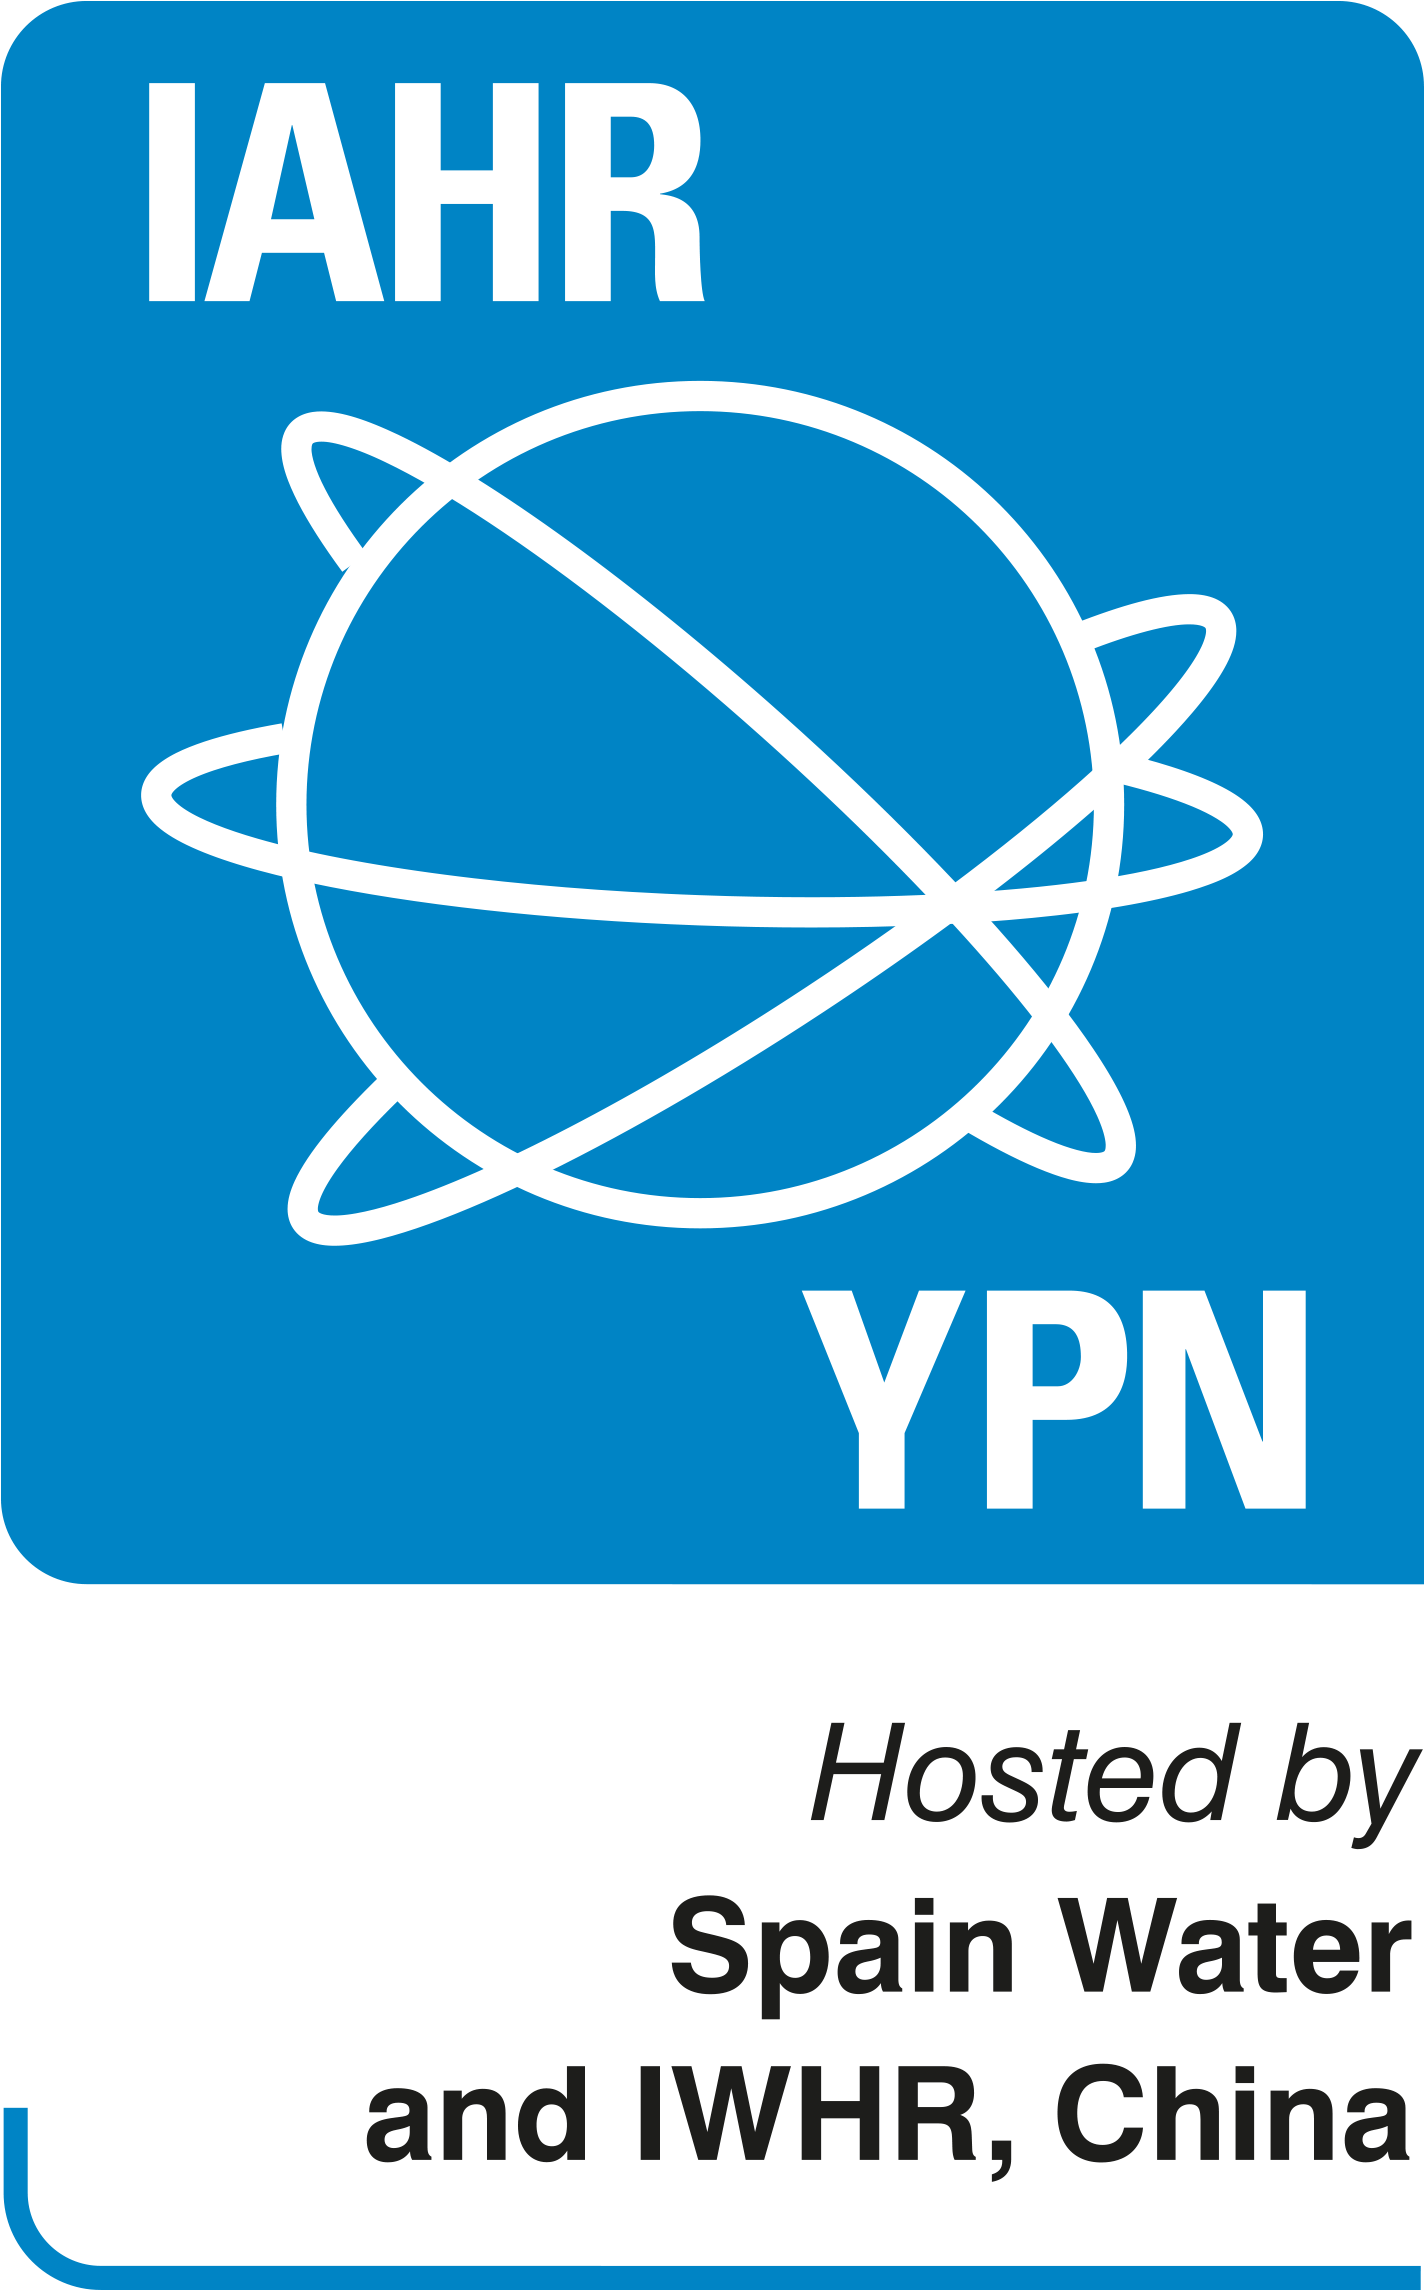 Jpg Ypn Logoportret - Iahr Young Professional (1468x2362), Png Download